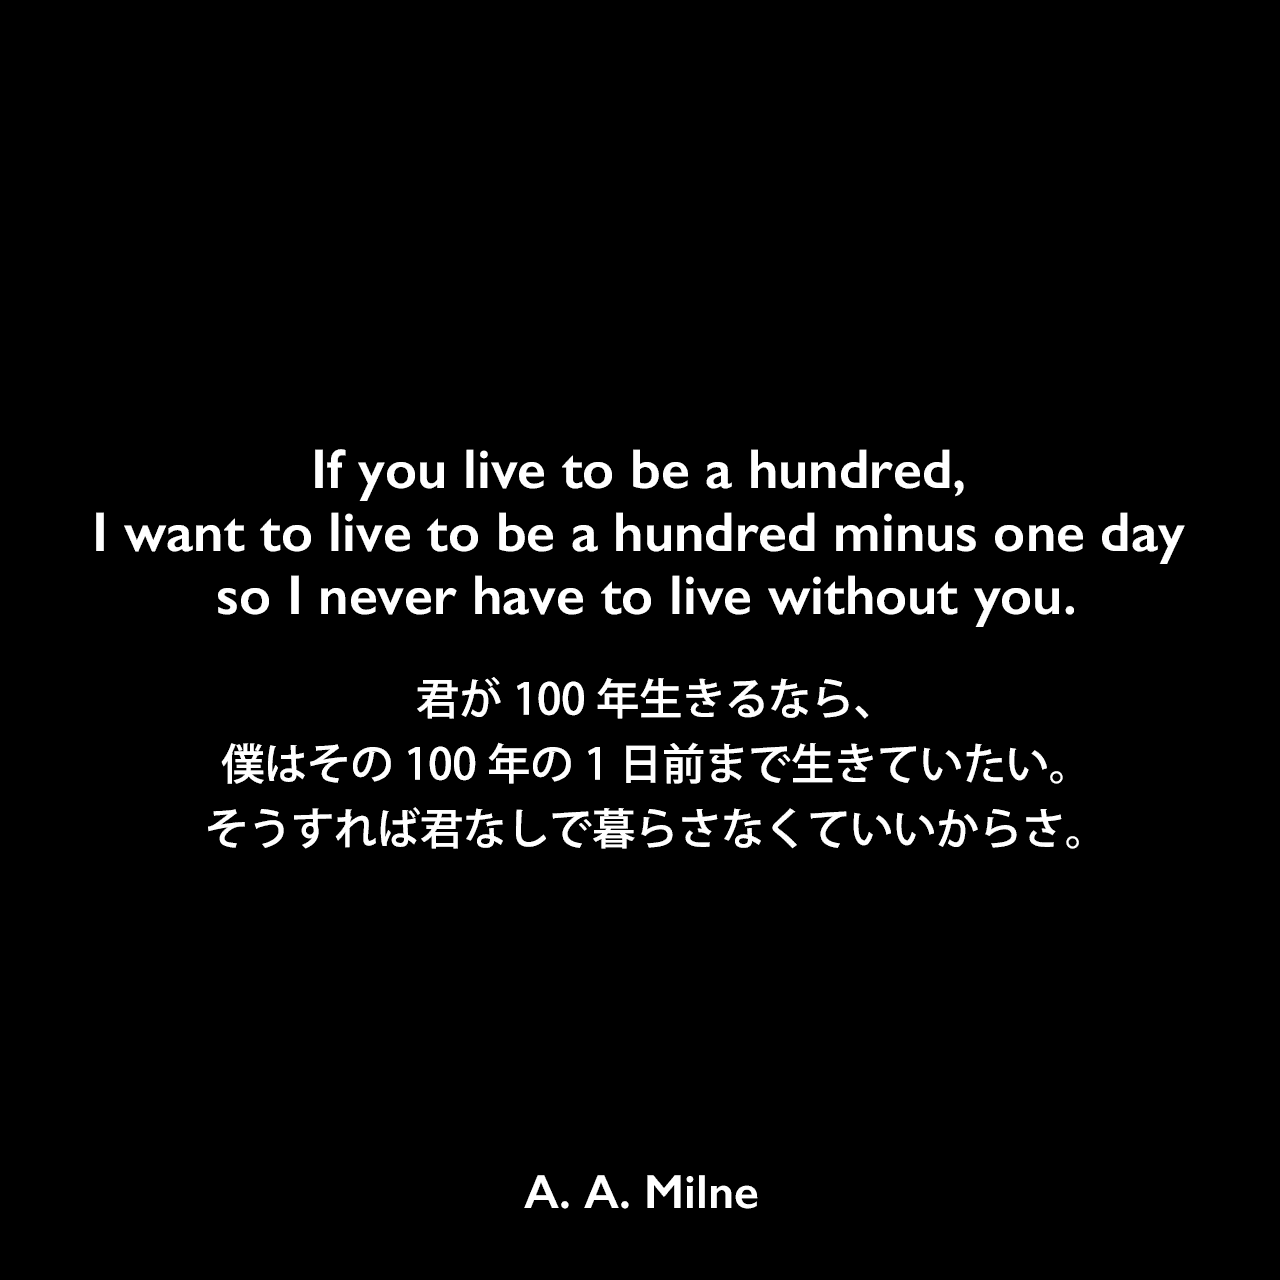 If you live to be a hundred, I want to live to be a hundred minus one day so I never have to live without you.君が100年生きるなら、僕はその100年の1日前まで生きていたい。そうすれば君なしで暮らさなくていいからさ。